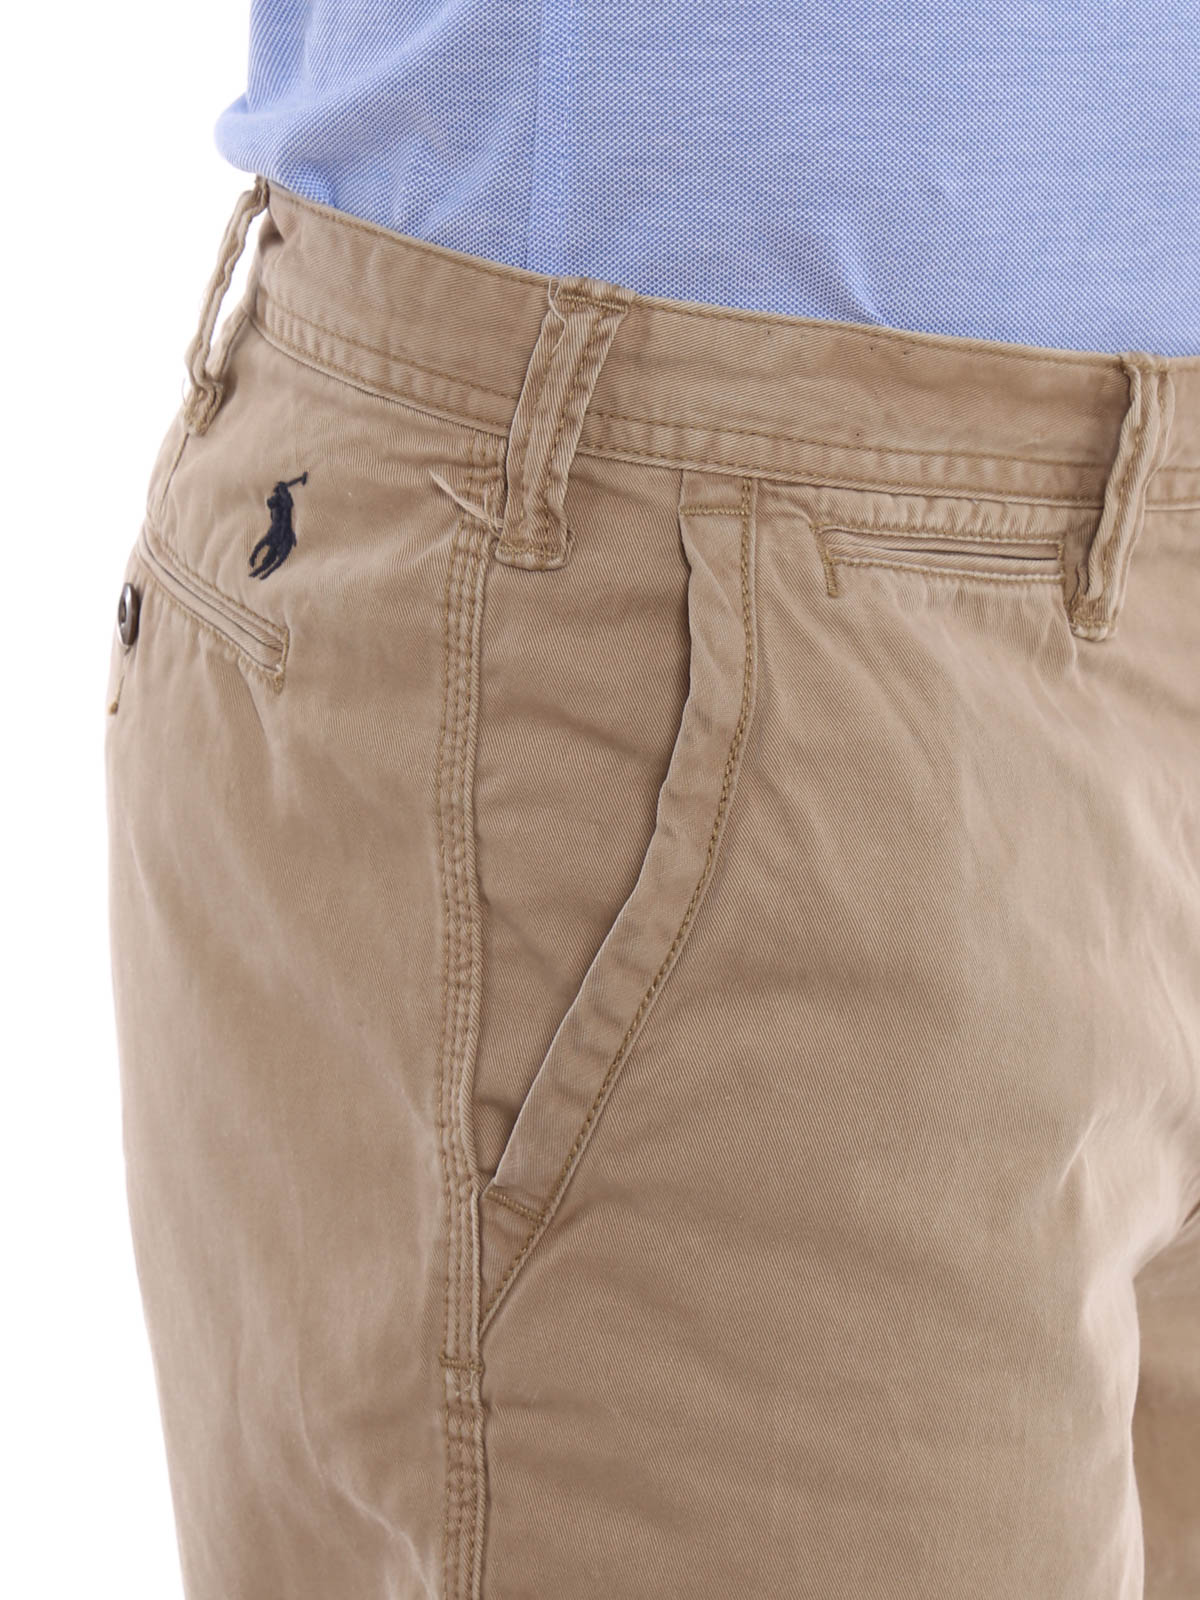 polo ralph lauren relaxed fit shorts